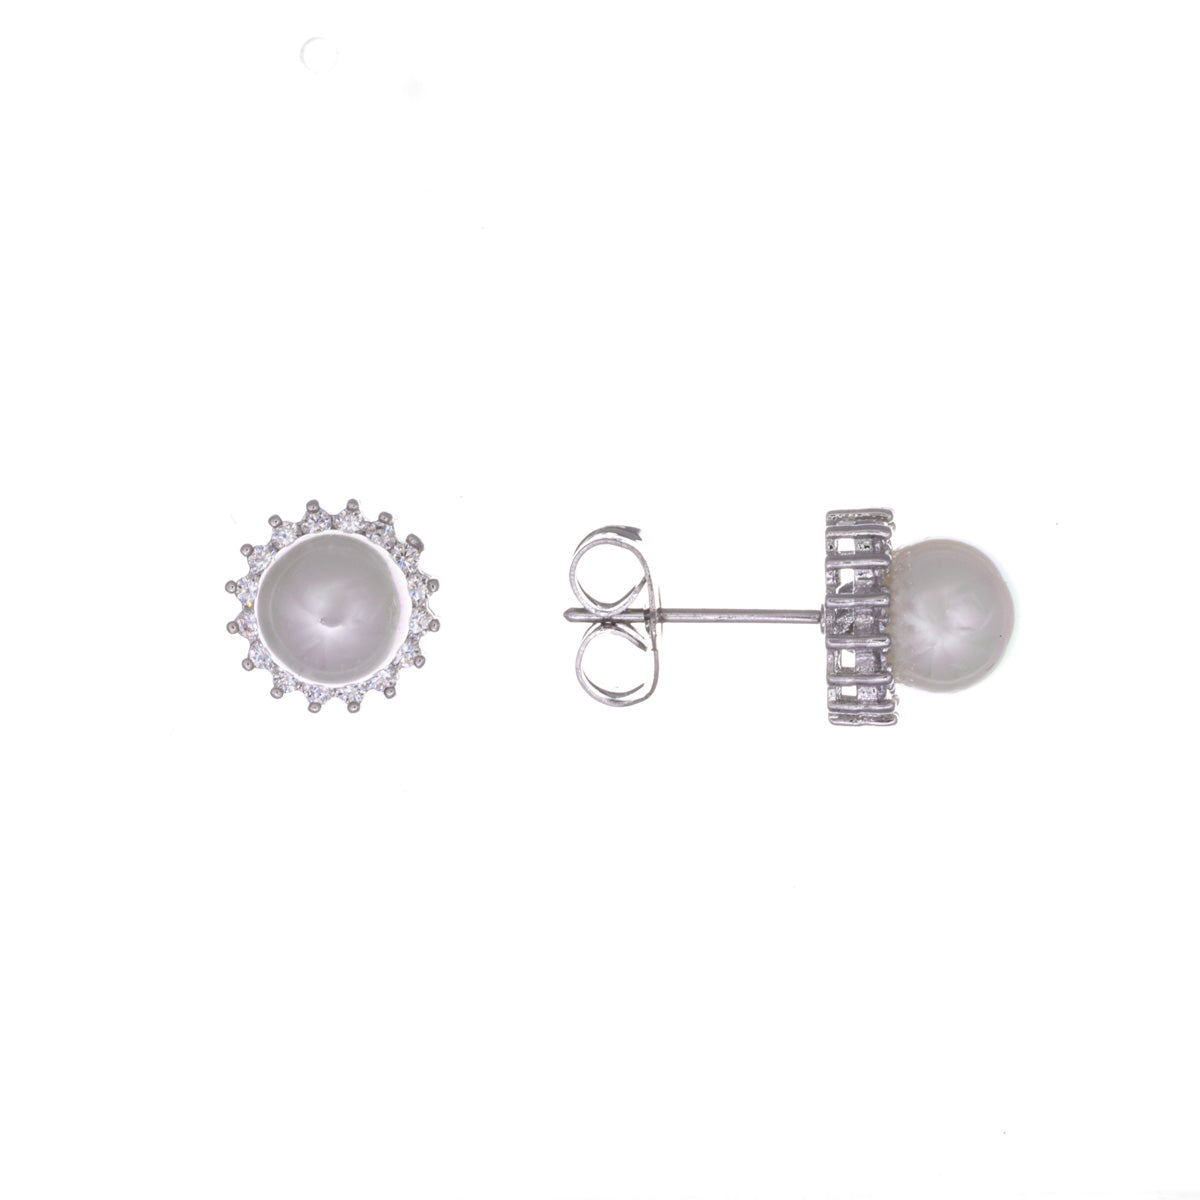 Pearl earrings with zirconia in a row